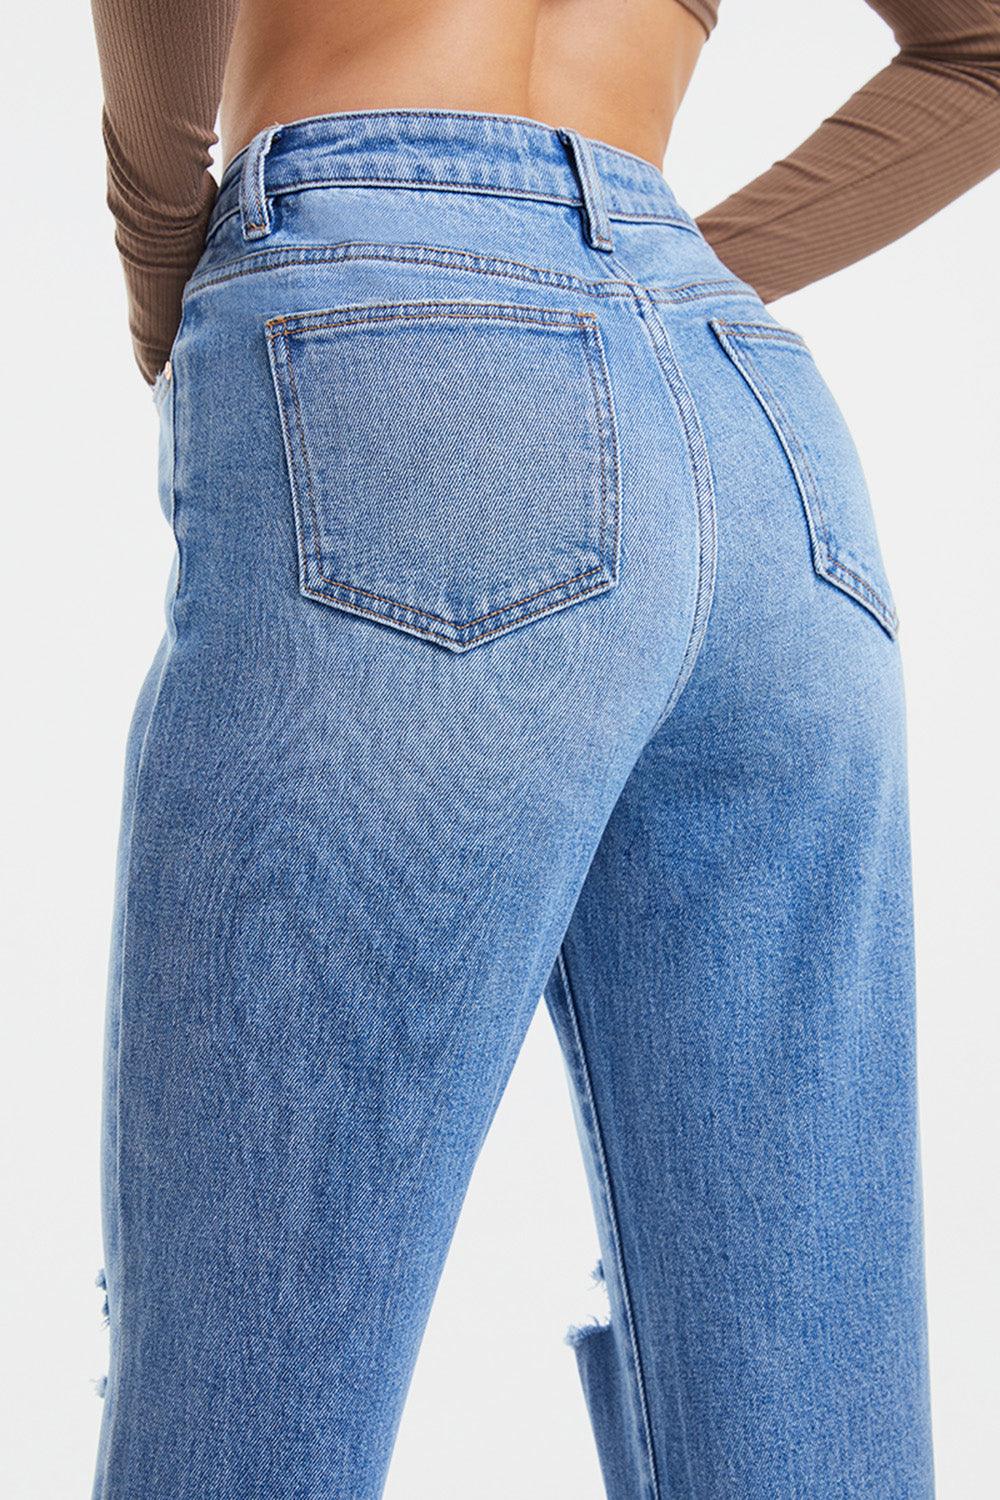 BAYEAS High Waist Distressed Cat's Whiskers Washed Jeans - Jessiz Boutique